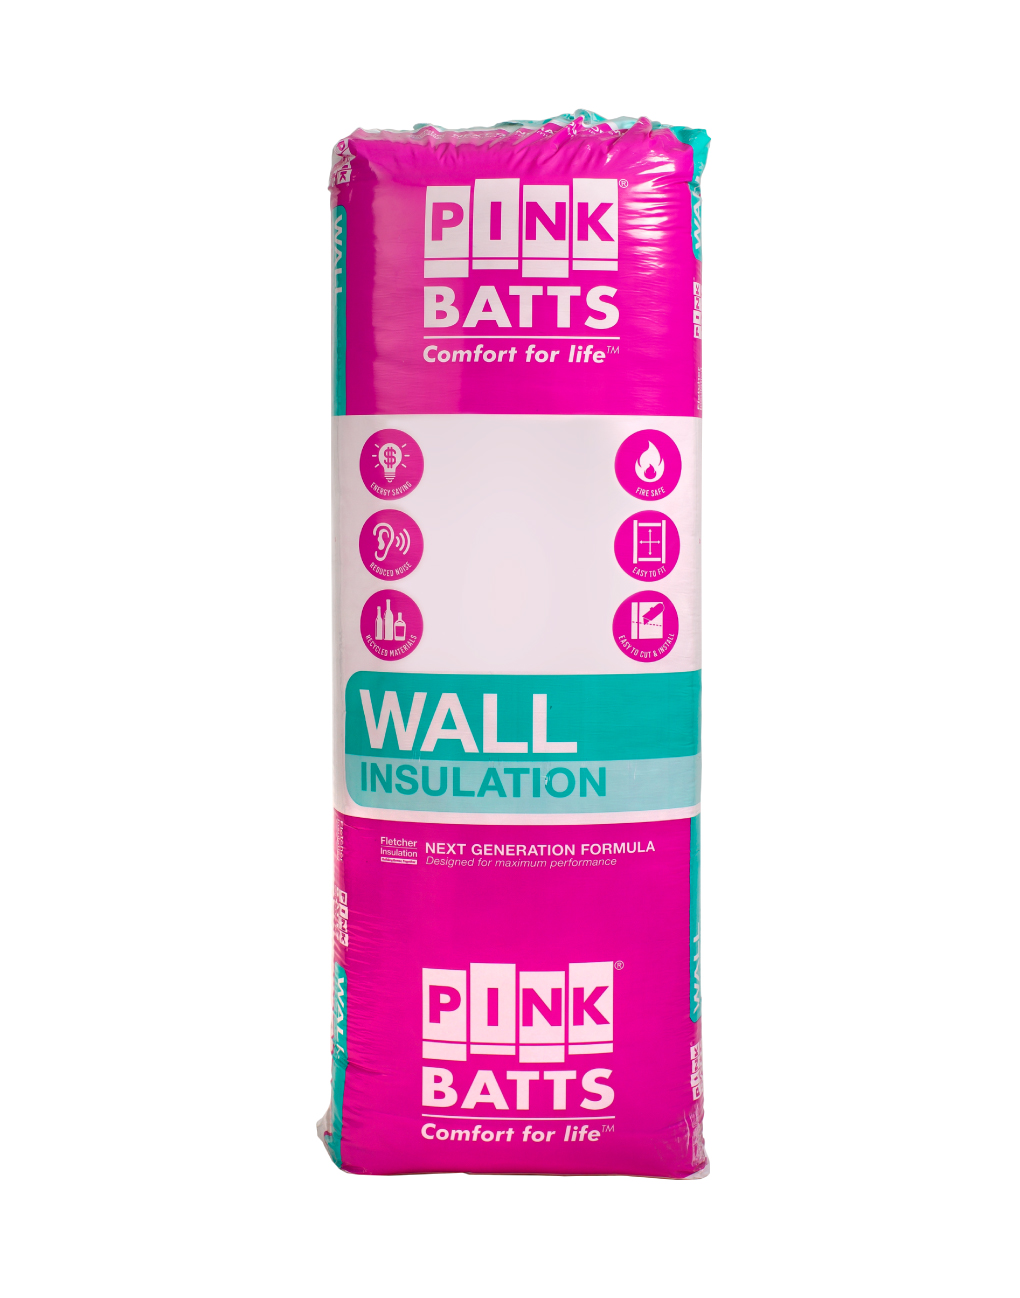 Buy Pink Batts Wall Insulation Insulation - New Packaging